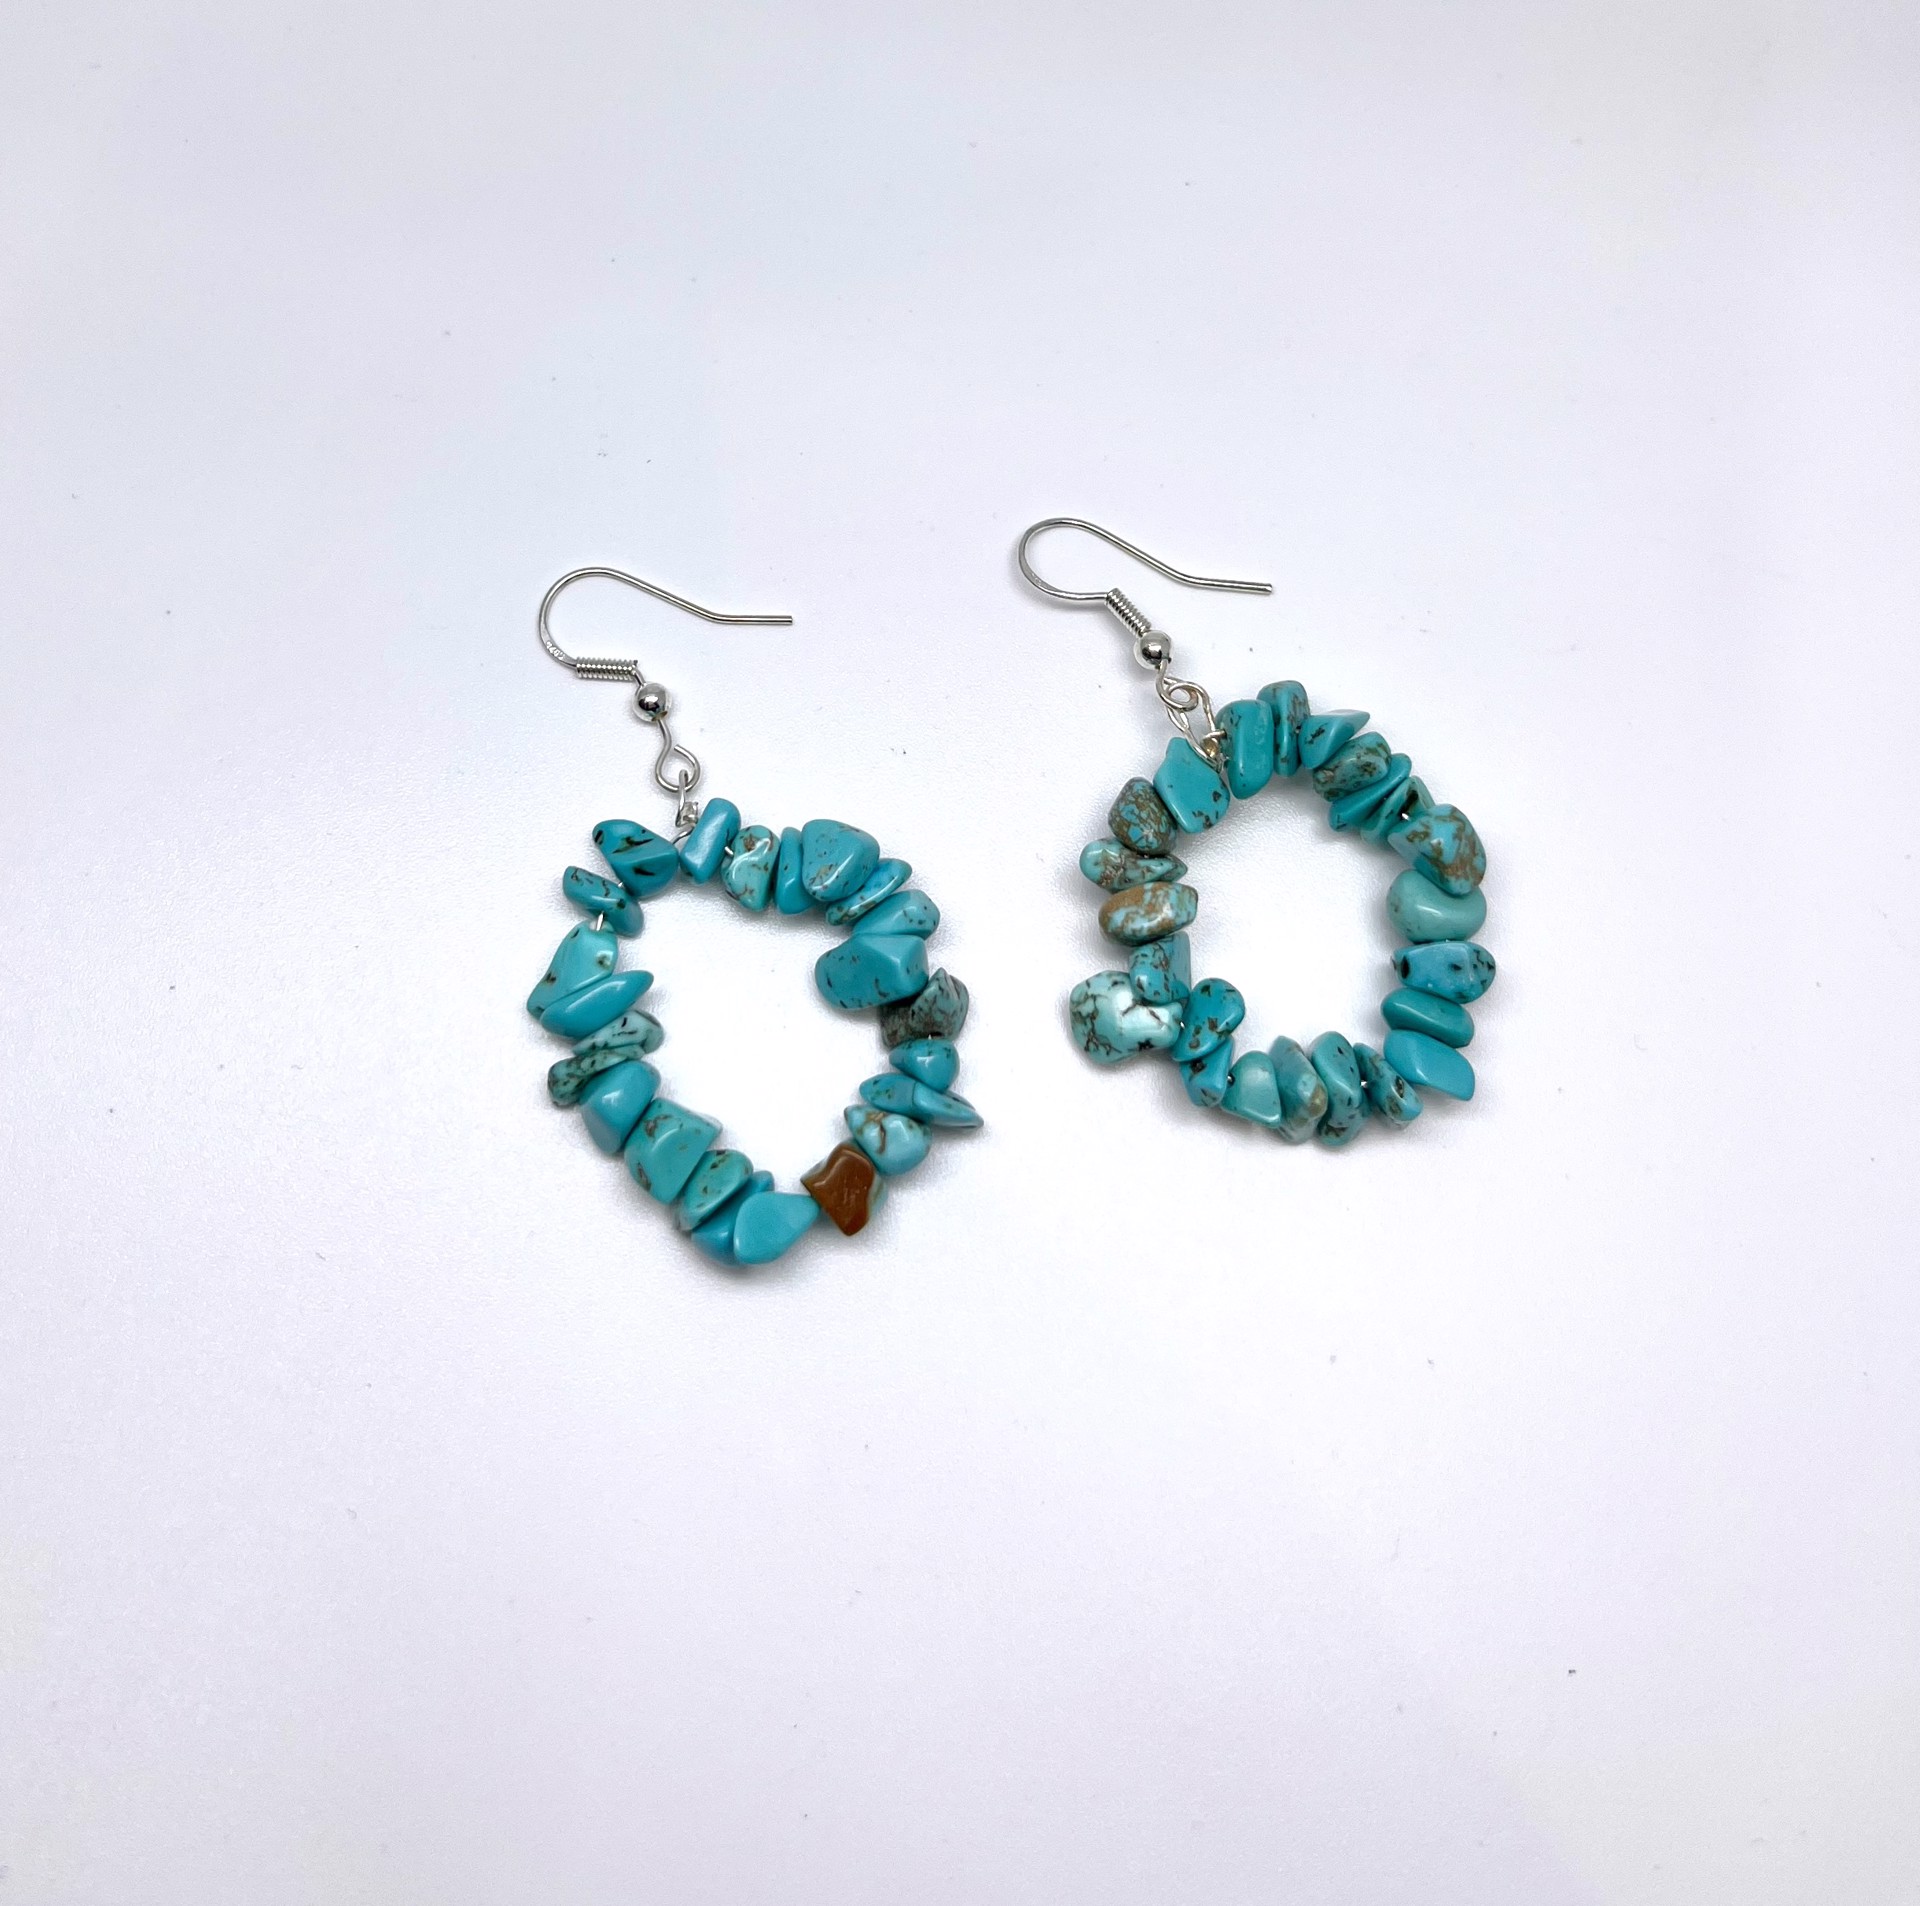 1594 Turquoise Earrings by Gina Caruso